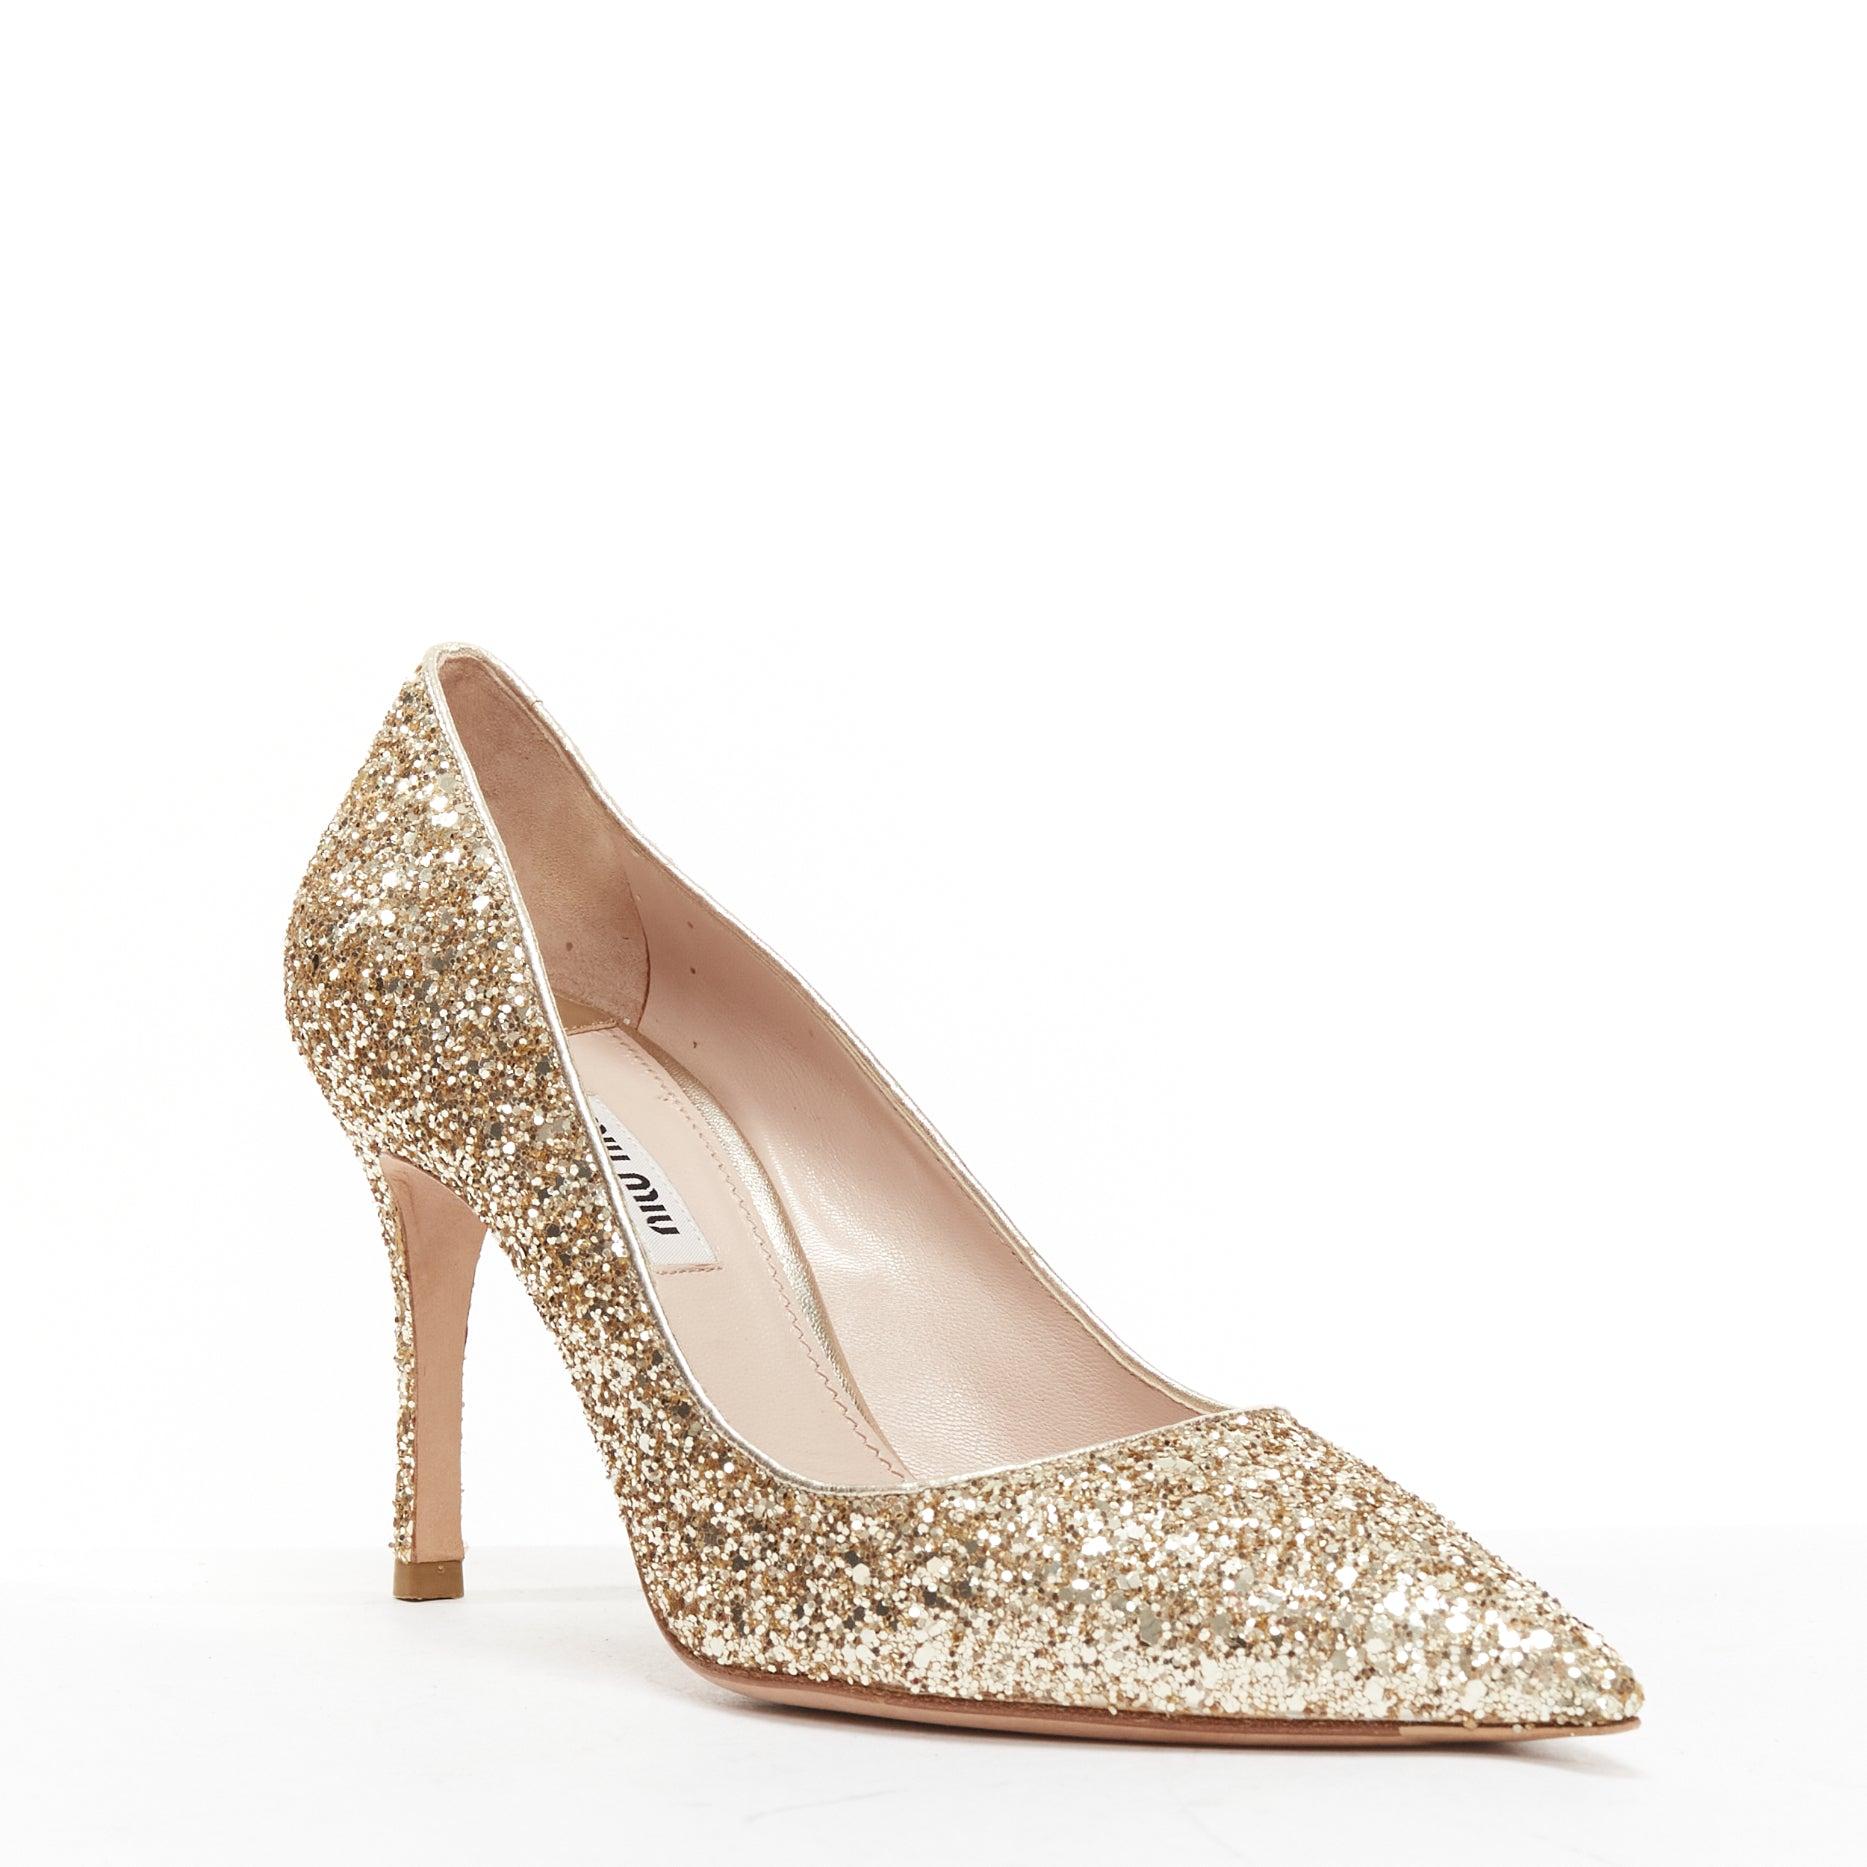 MIU MIU gold glitter pointed toe stiletto party pumps EU38
Reference: BSHW/A00146
Brand: Miu Miu
Designer: Miuccia Prada
Material: Leather
Color: Gold
Pattern: Solid
Closure: Slip On
Lining: Nude Leather
Extra Details: Stiletto heels.
Made in: